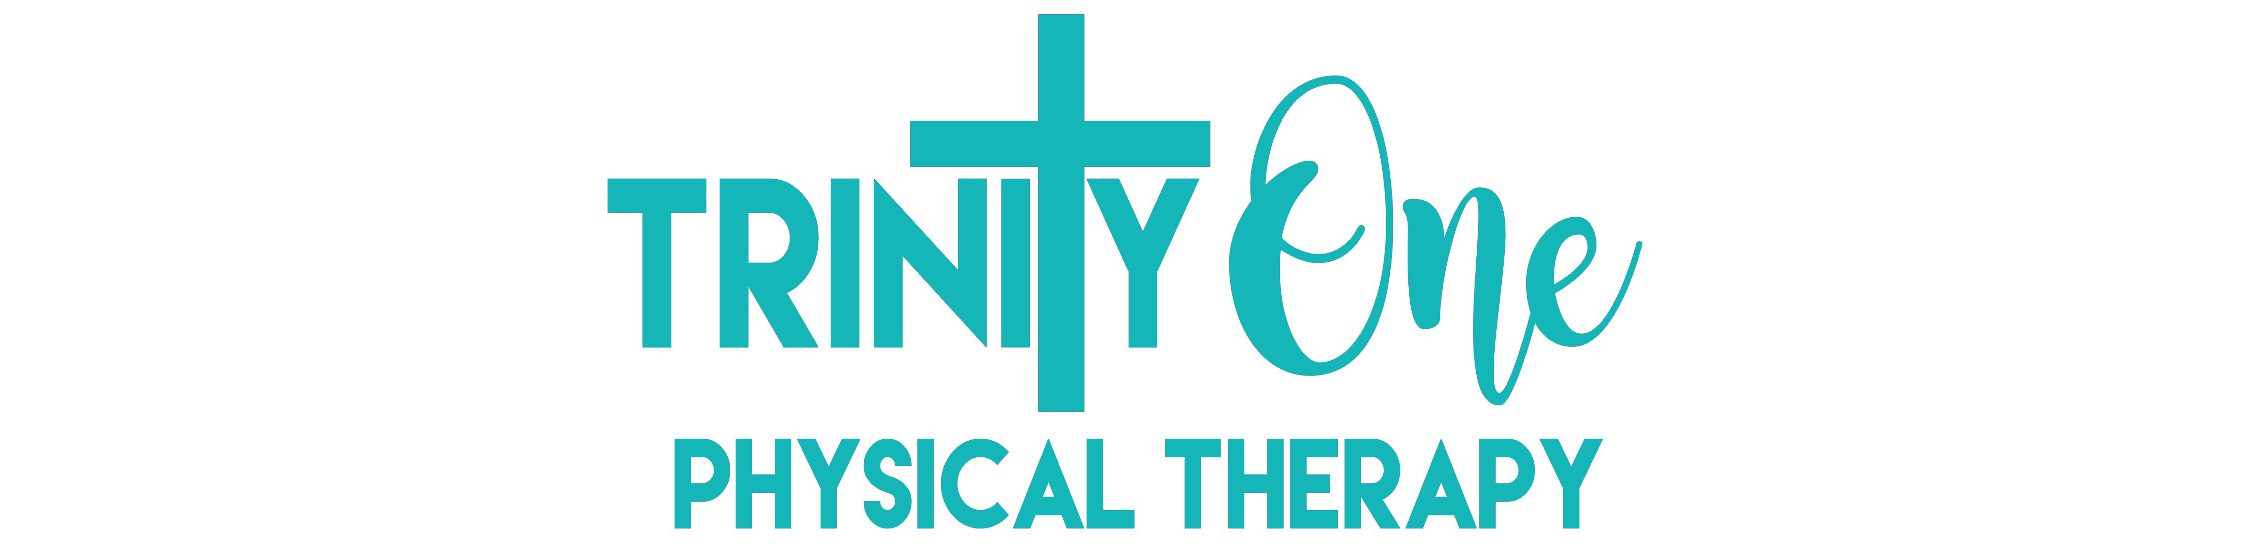 TrinityOne Physical Therapy